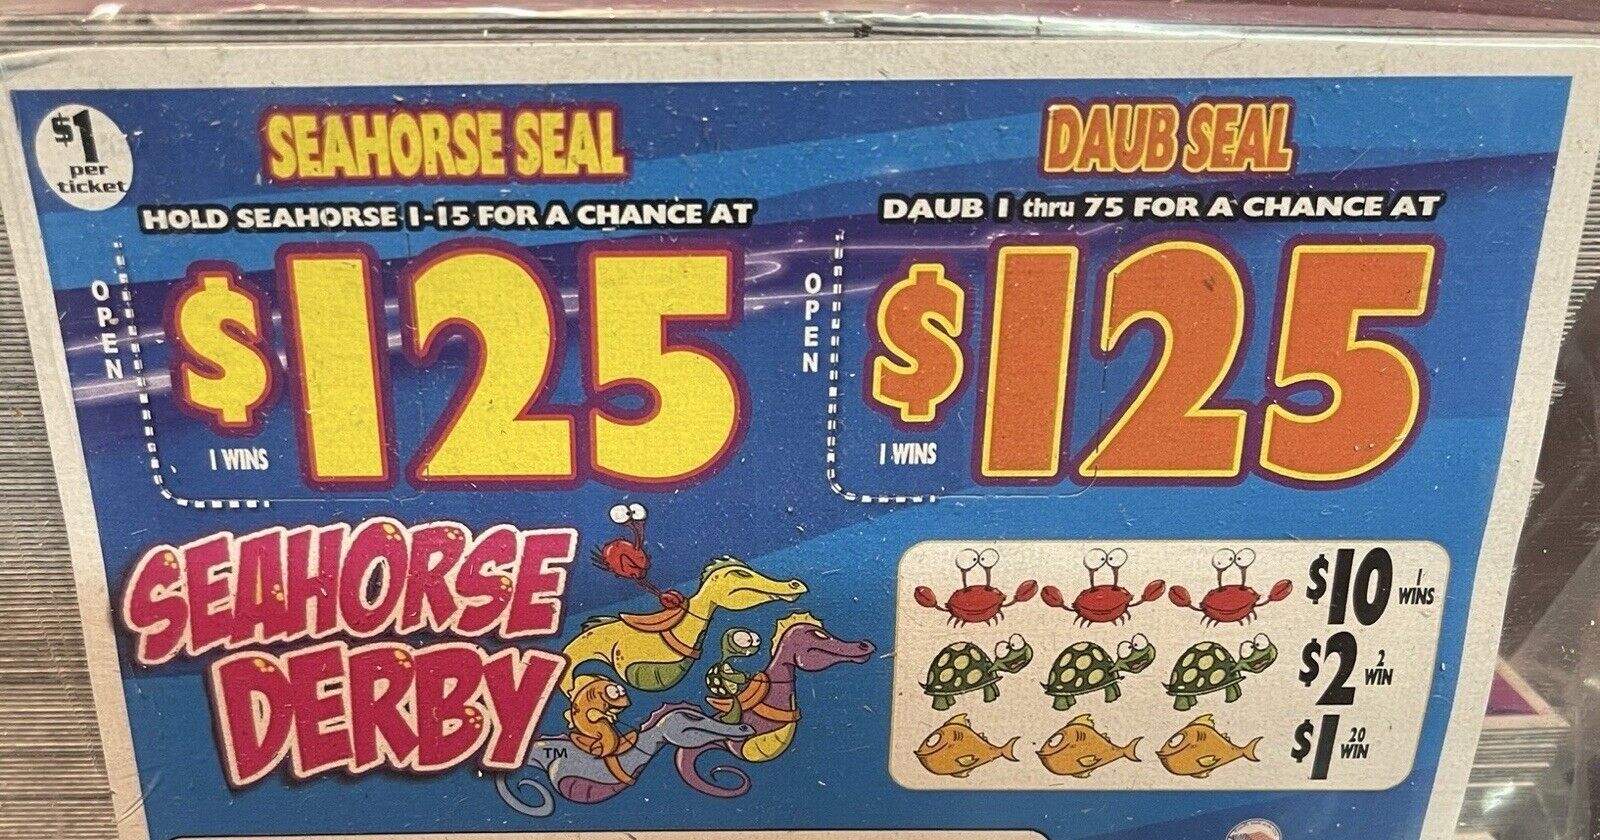 NEW pull tickets Seahorse Derby Flash- Seal Card Tabs